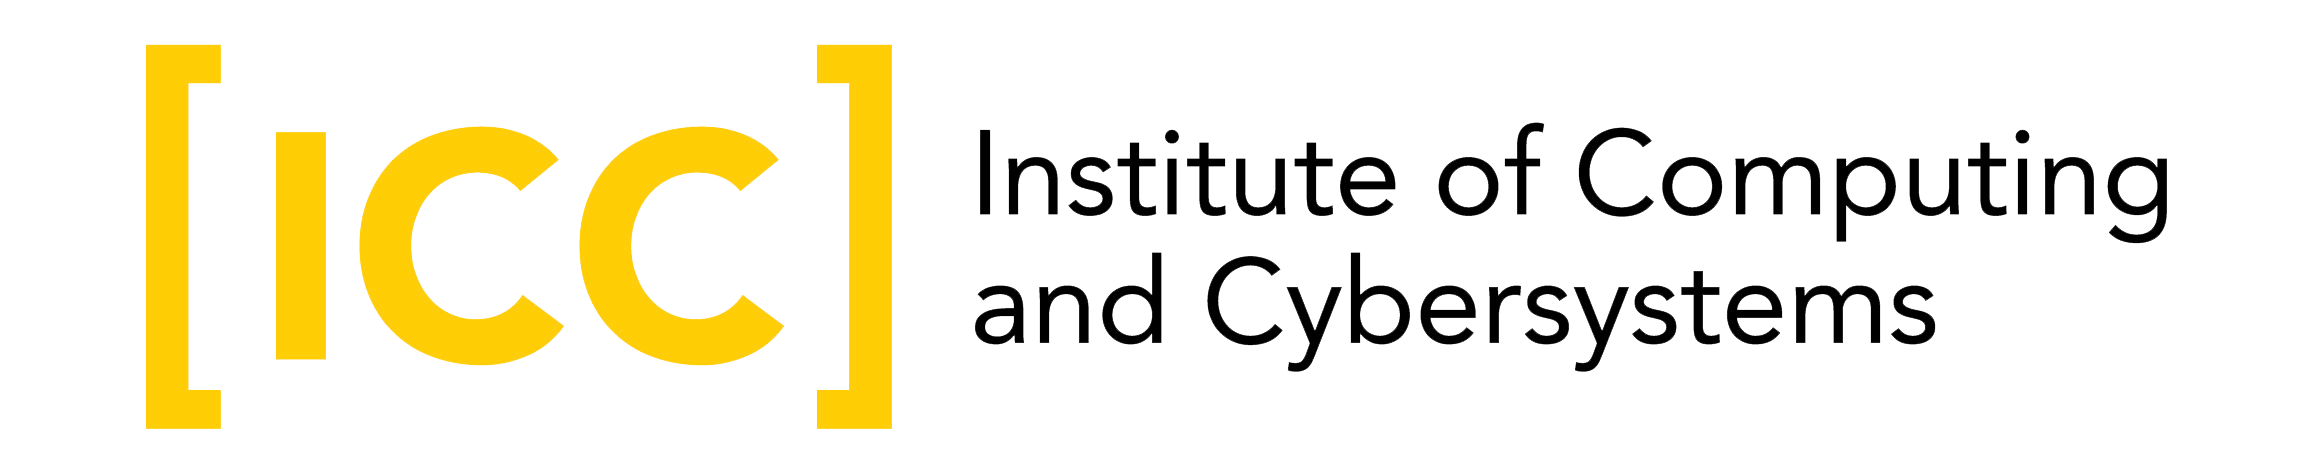 Institute of Computing and Cybersystems